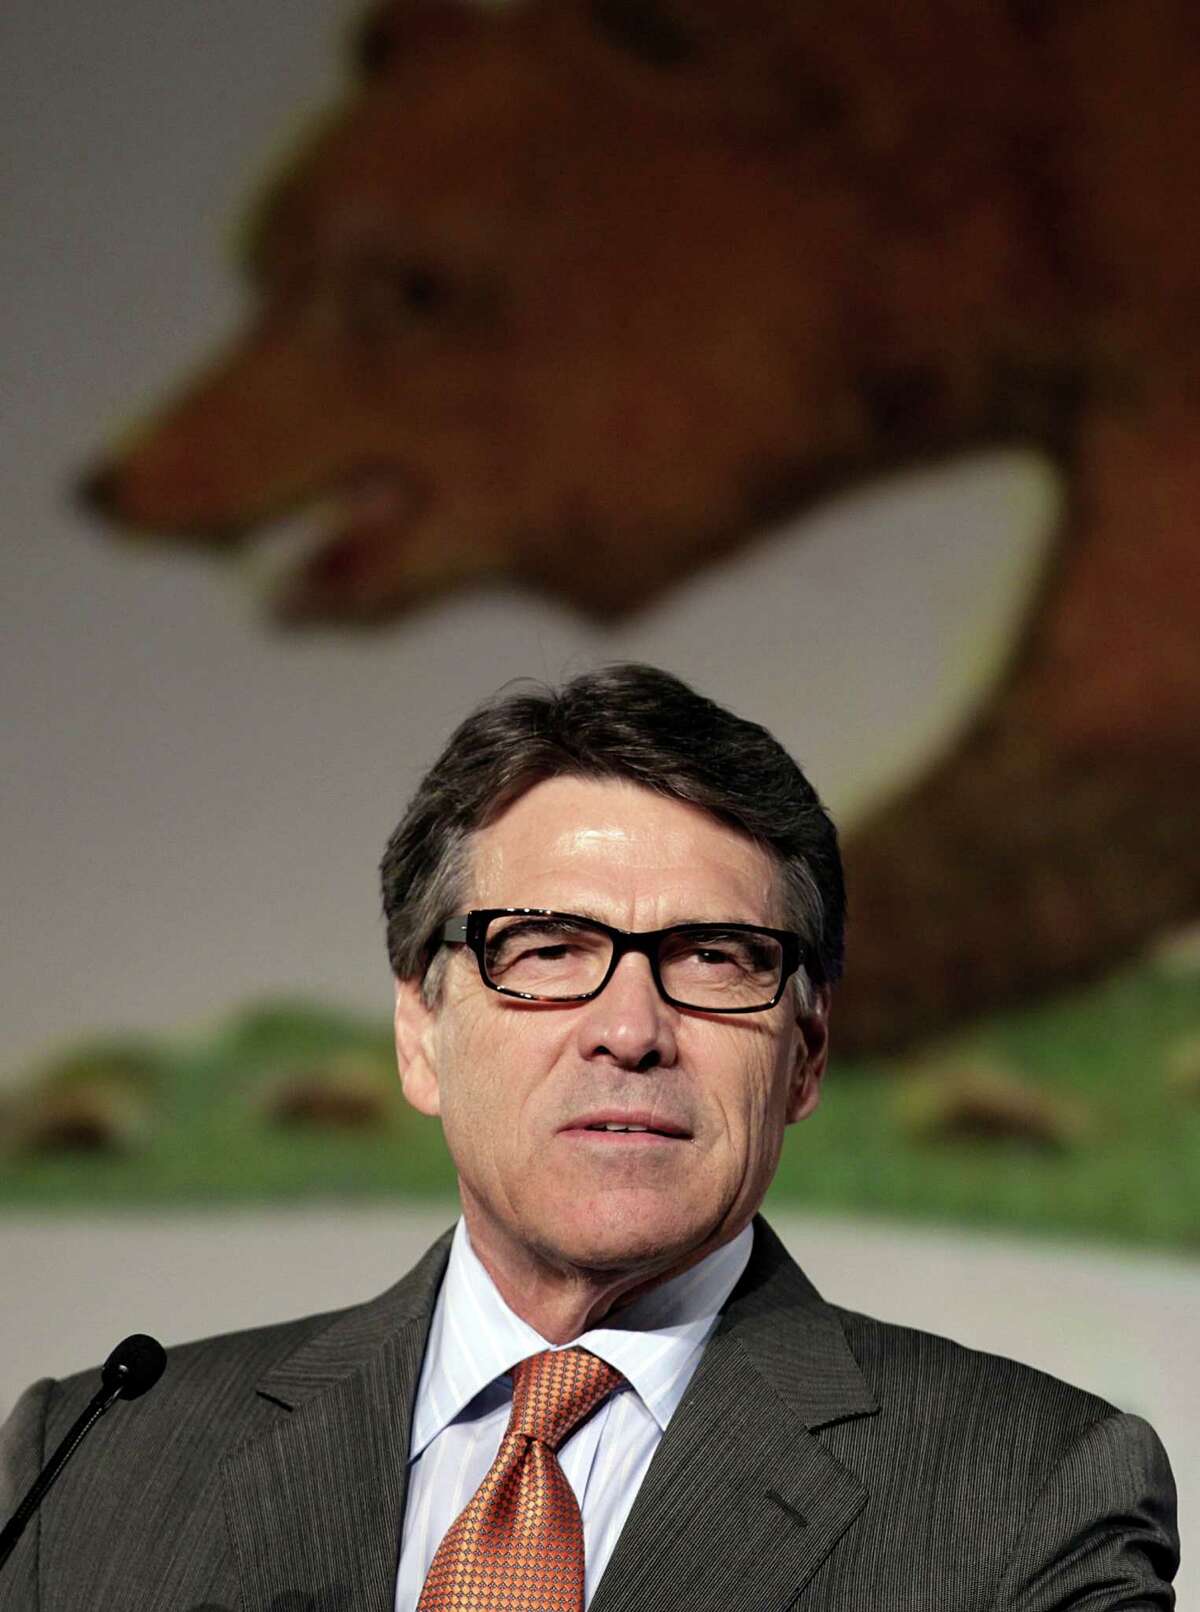 Texas Gov. Rick Perry gives the keynote speech at the California Republican Party convention in Anaheim, Calif., Saturday, Oct. 5, 2013. (AP Photo/Reed Saxon)